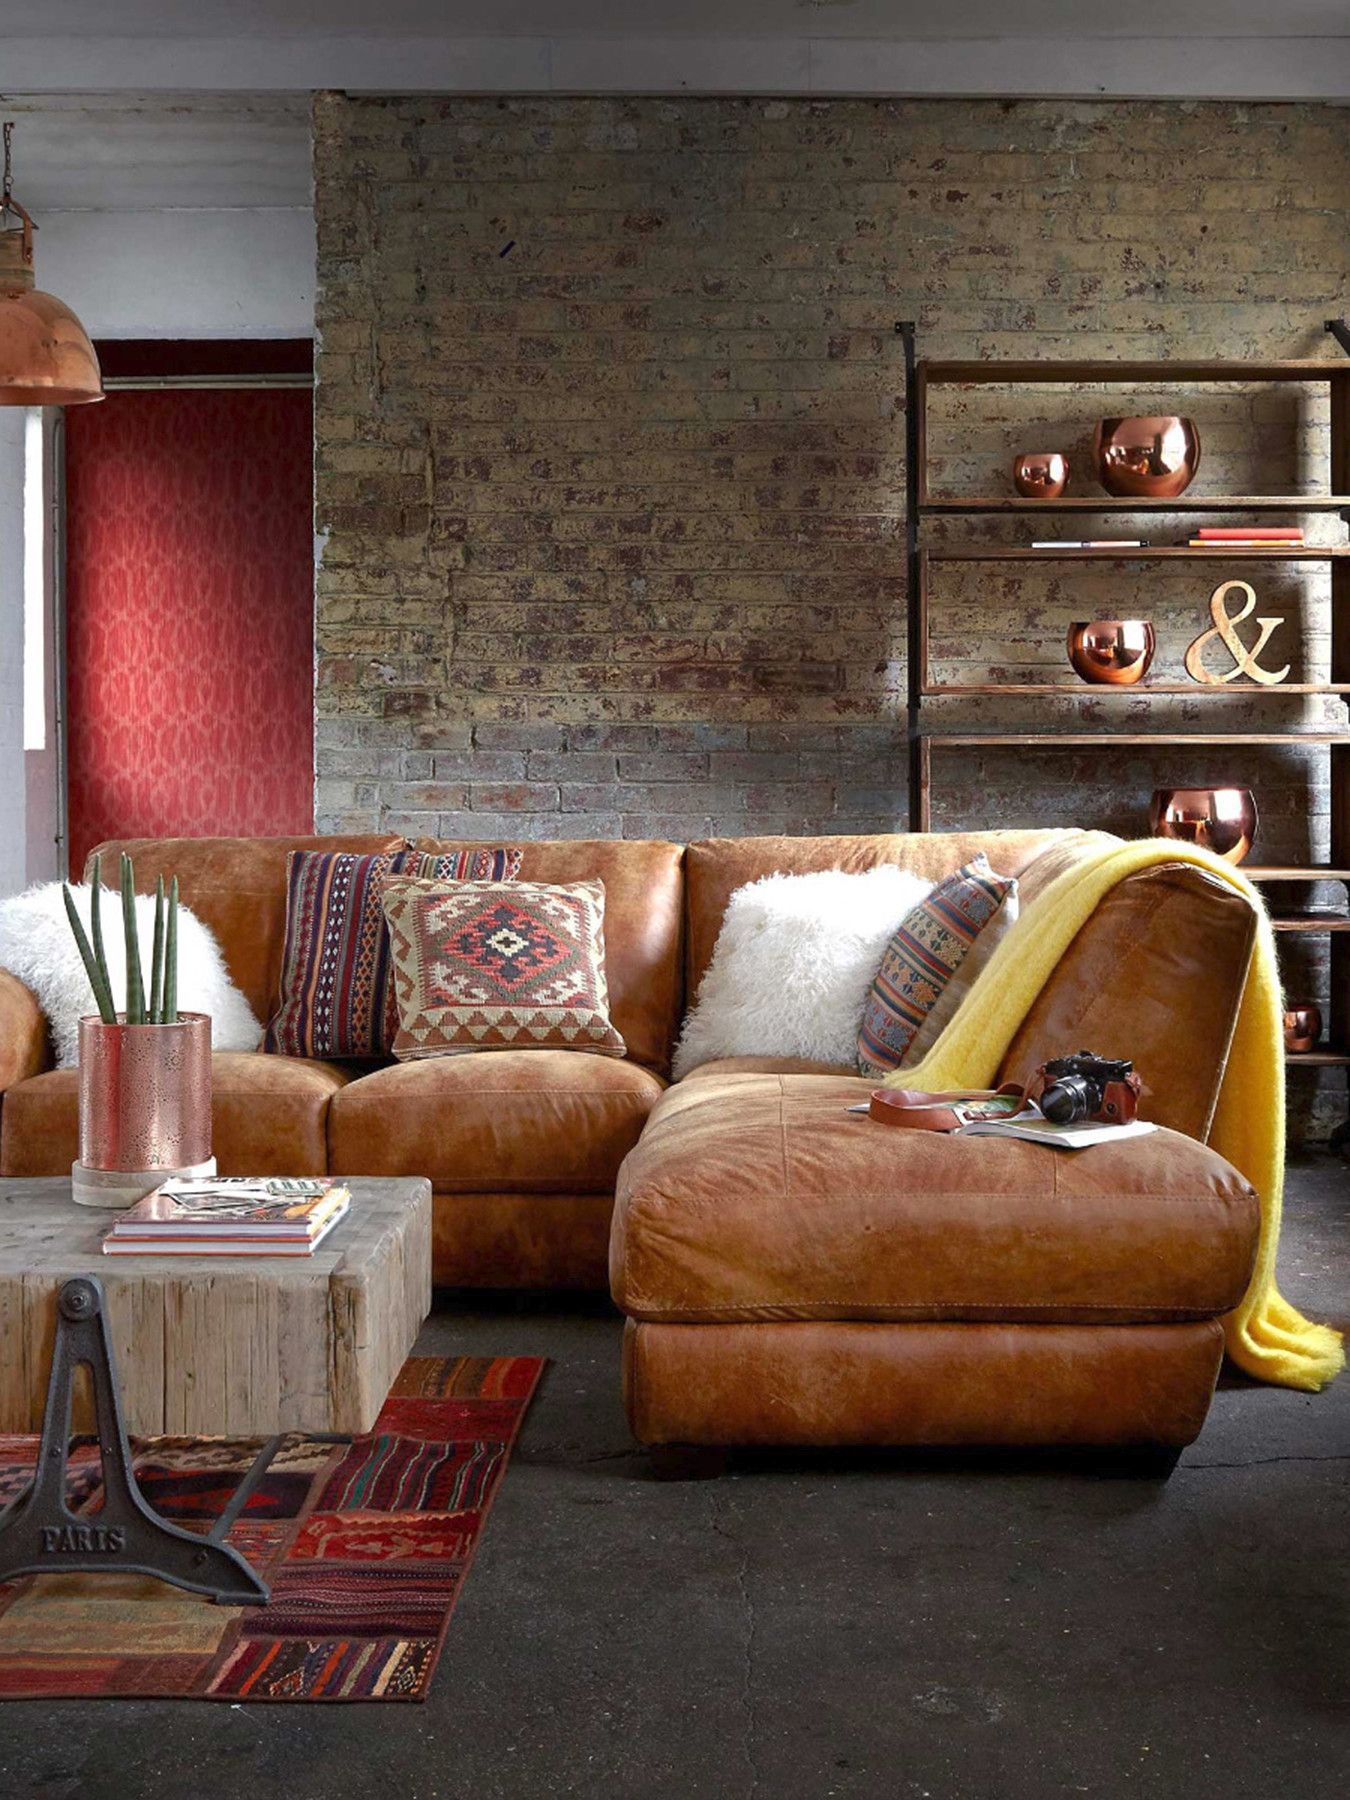 Why Corner Leather Sofa is a Great Choice